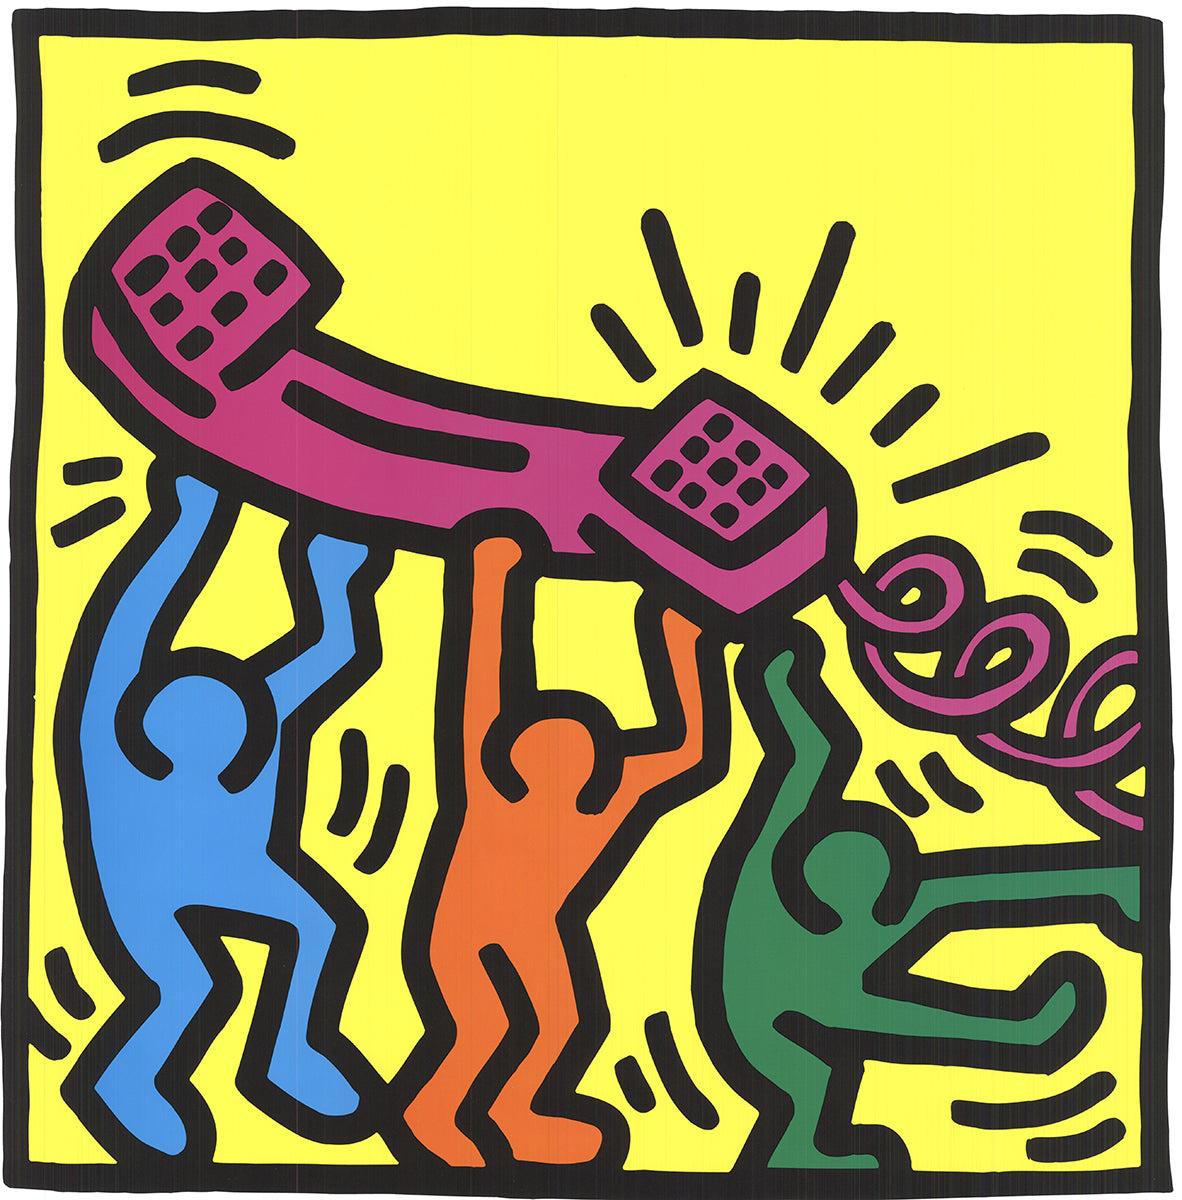 Keith Haring 'Untitled, 1989' 2008- Lithographie offset en vente 1